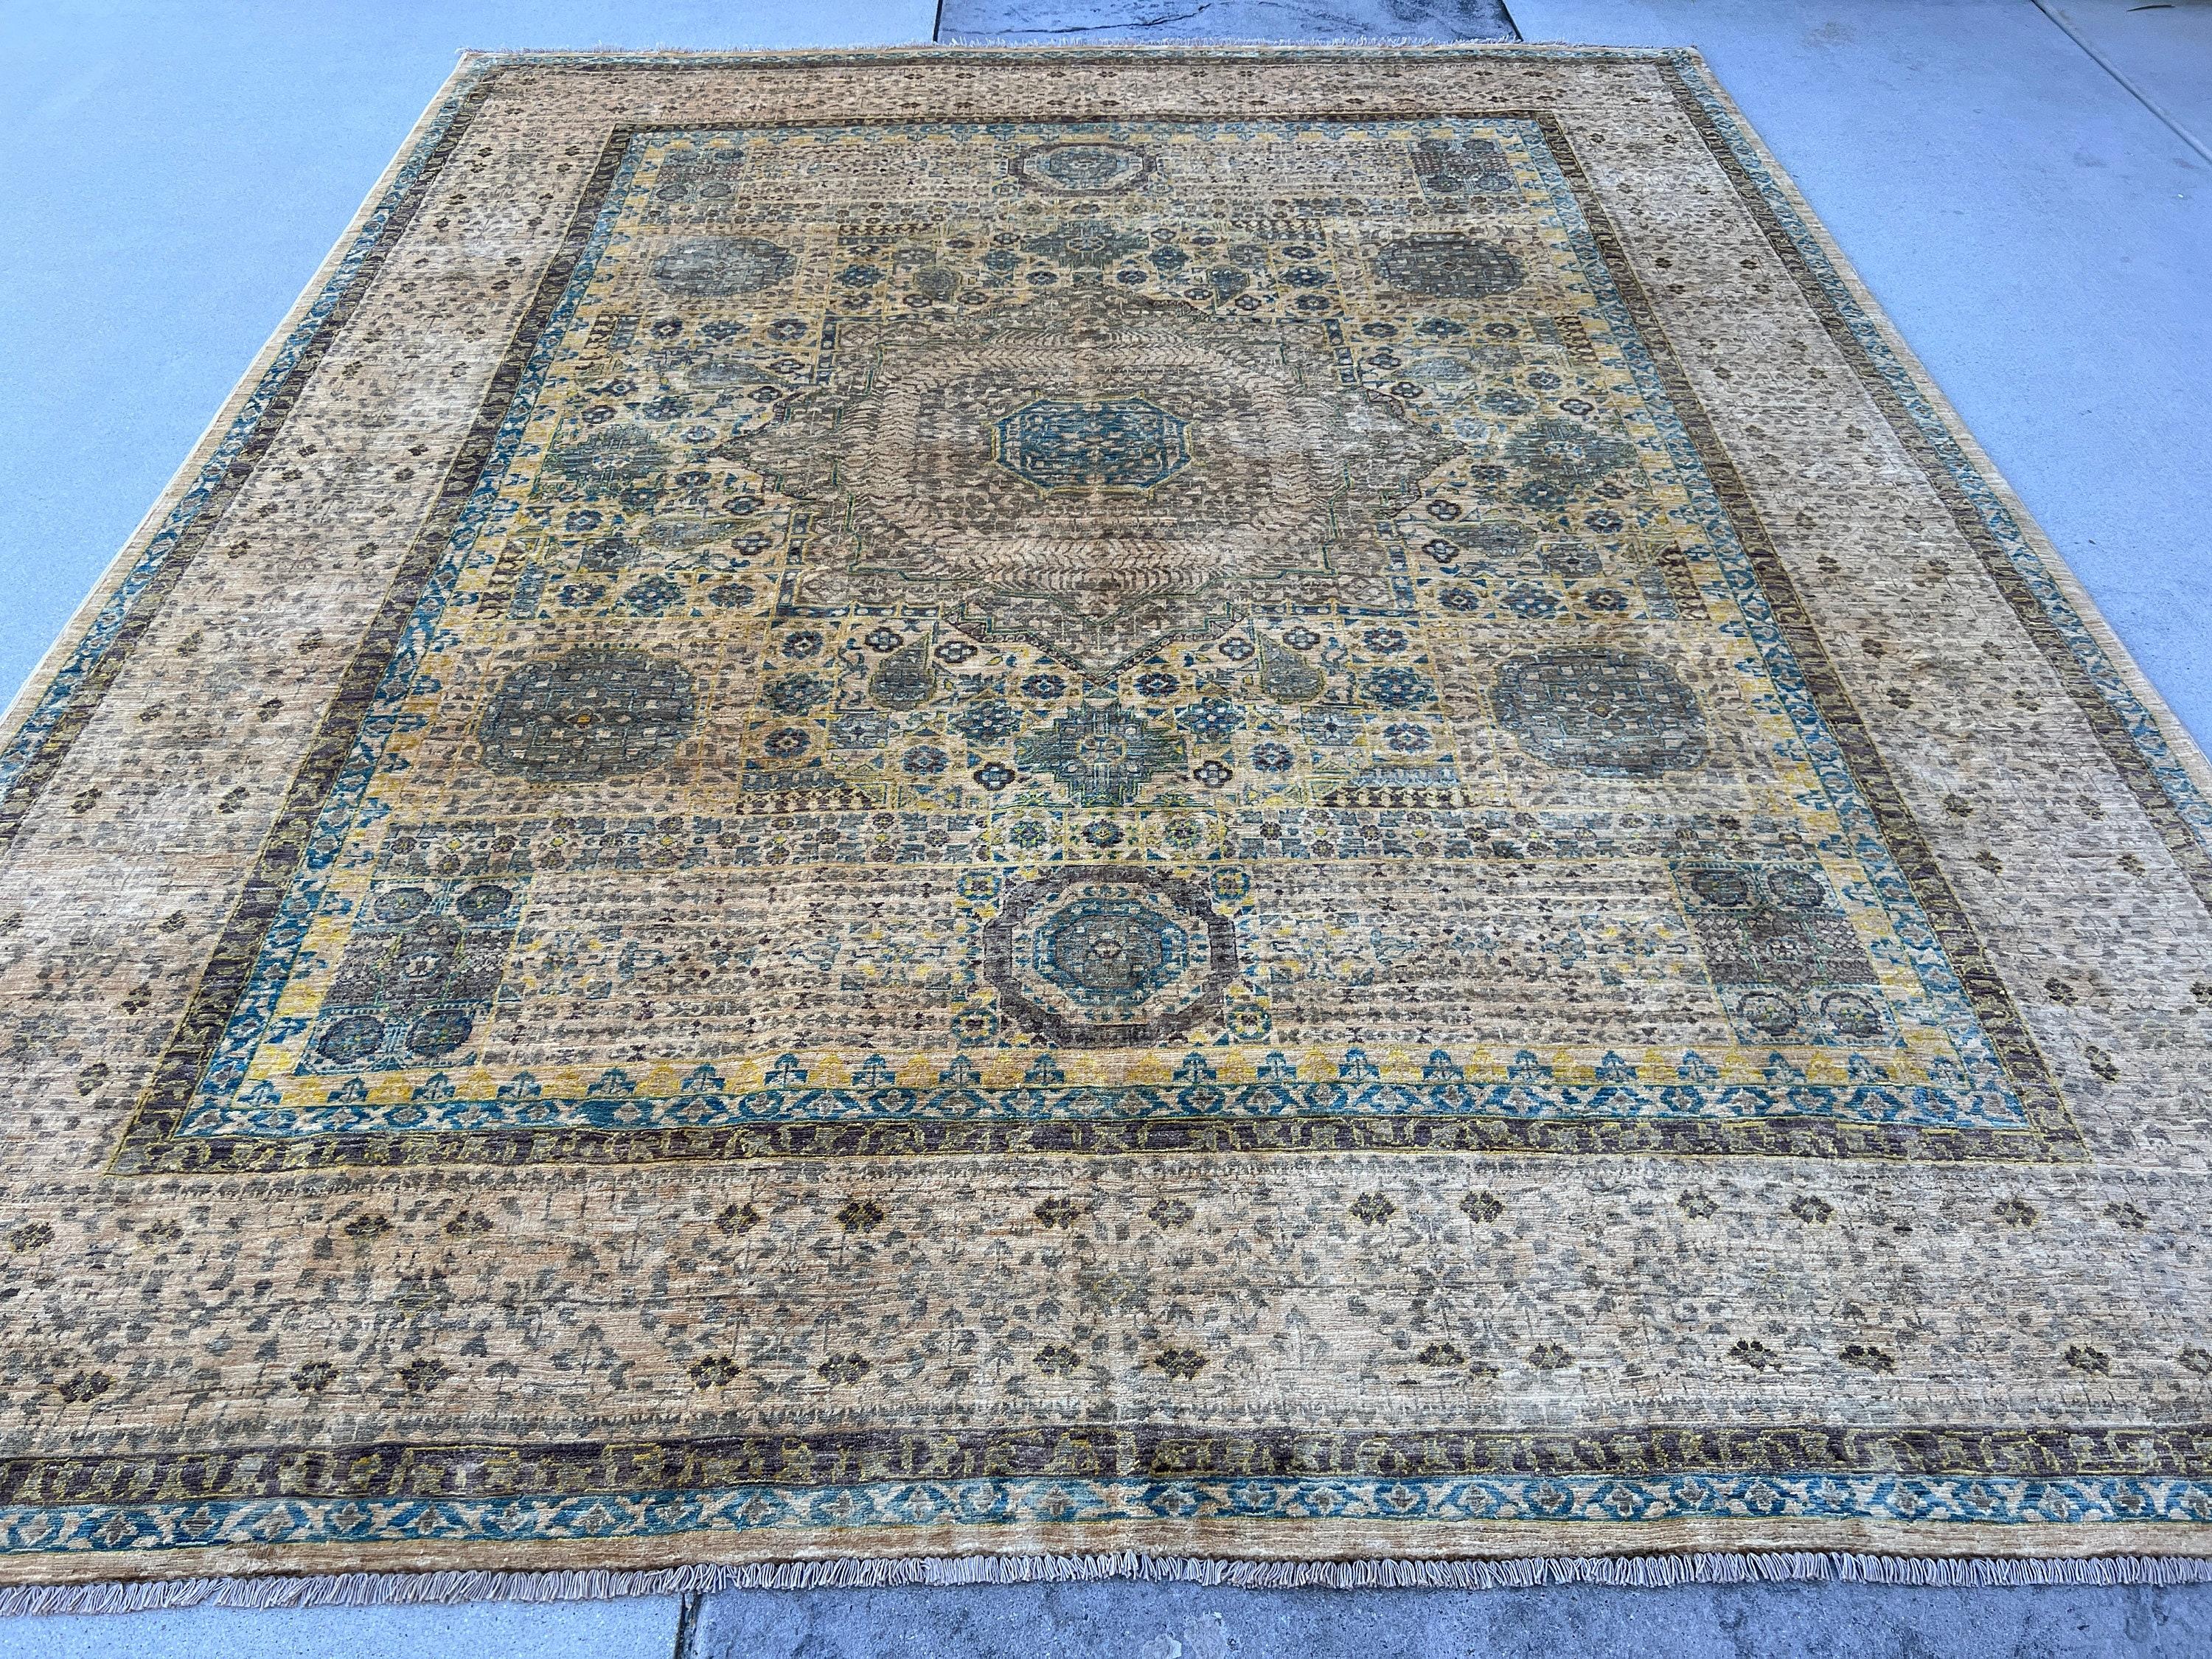 8x10 Hand-Knotted Mamluk Afghan Rug Premium Hand-Spun Afghan Wool Fair Trade In New Condition For Sale In San Marcos, CA